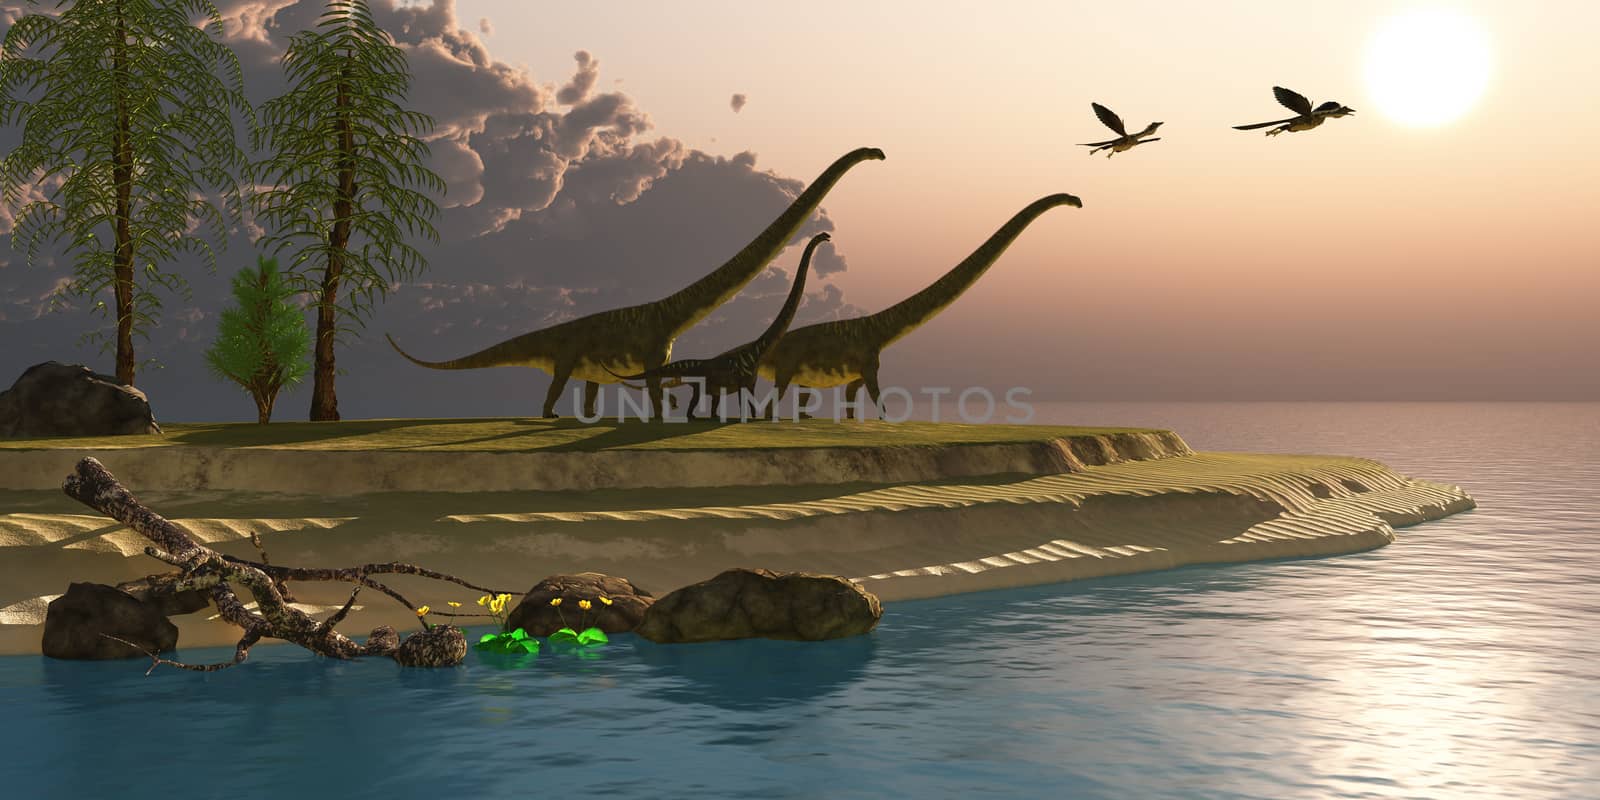 Mamenchisaurus dinosaurs walk to a lake for a morning drink as Microraptors fly overhead.